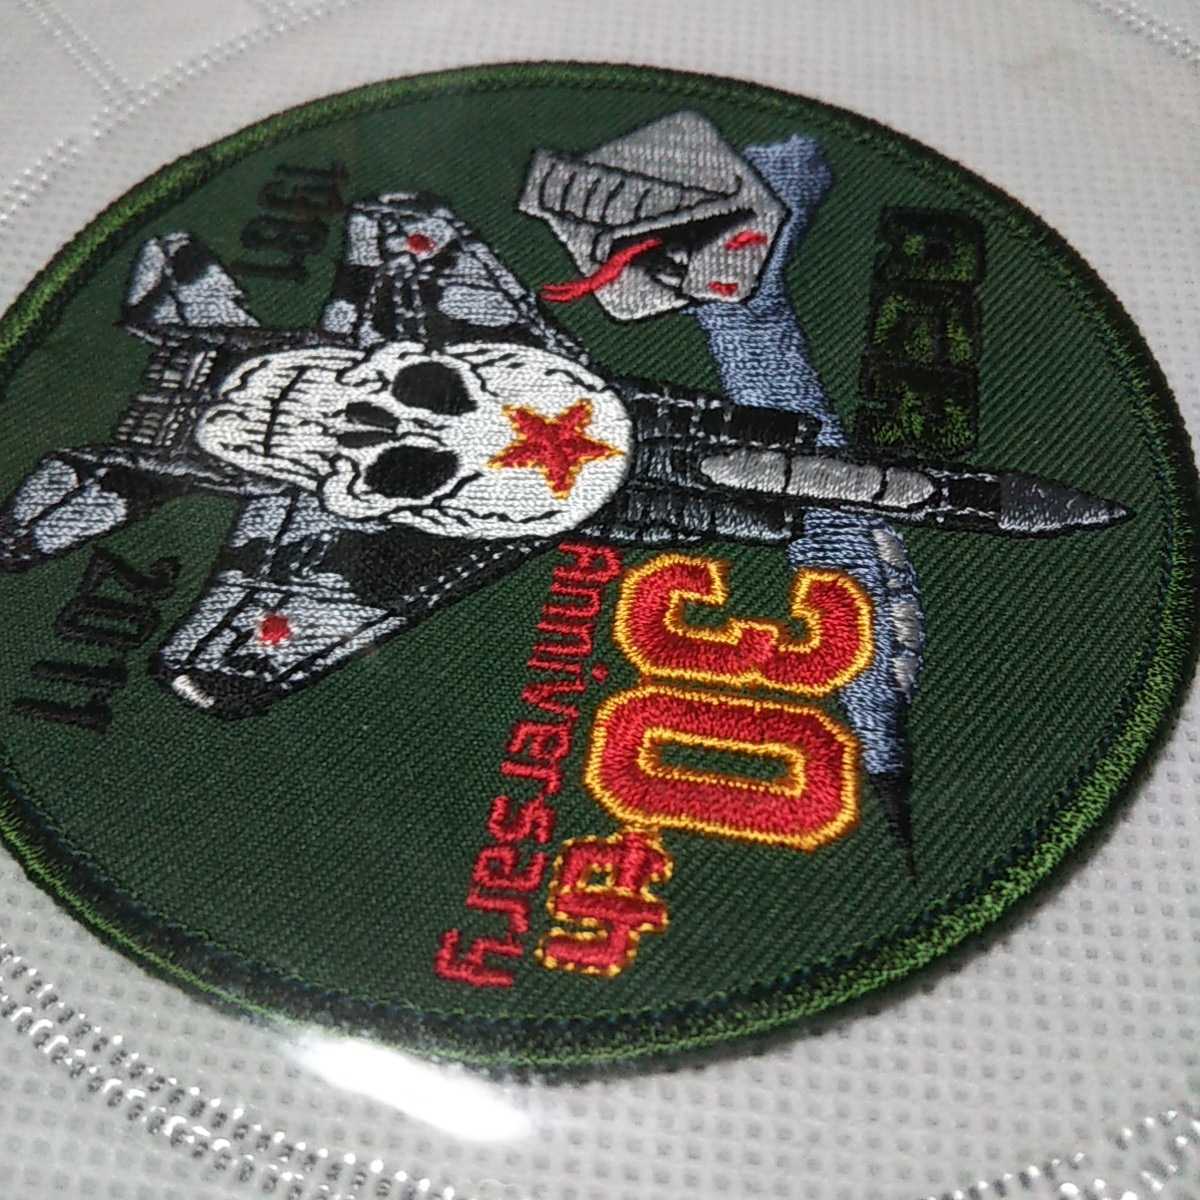  Koku Fan 2012 3 month number Special made appendix patch flight ...30 anniversary commemoration patch 